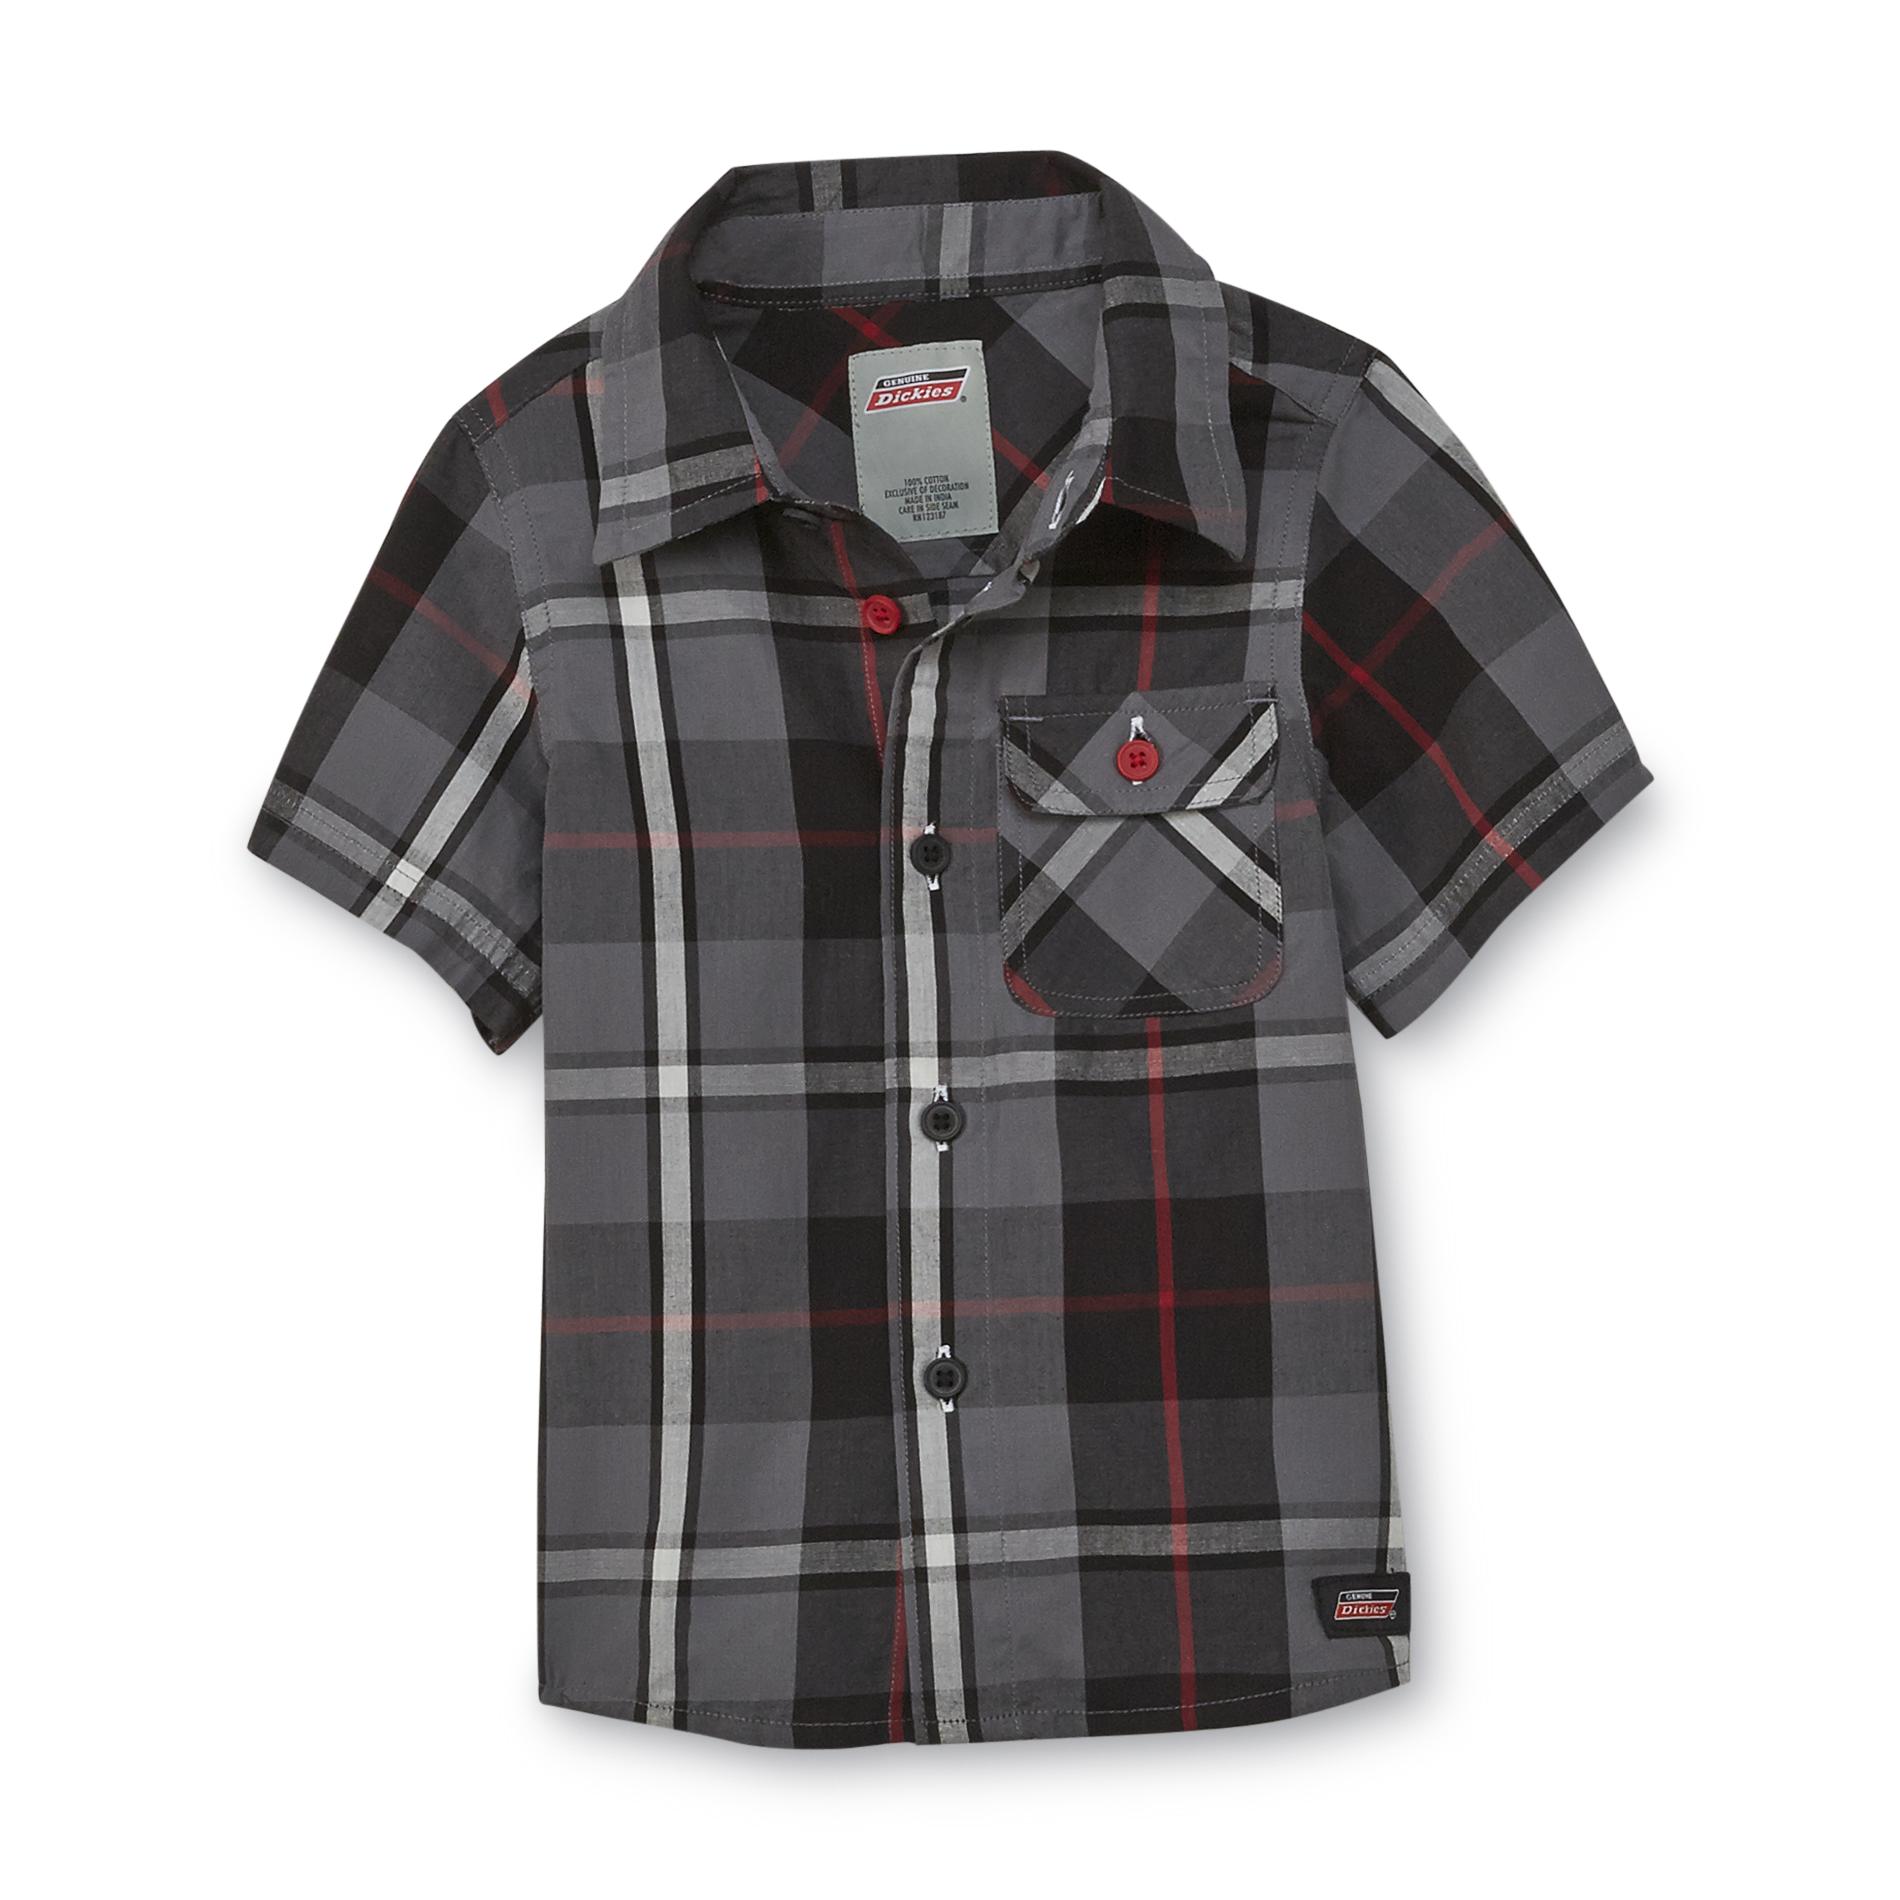 Dickies Toddler Boy's Button-Front Shirt - Plaid